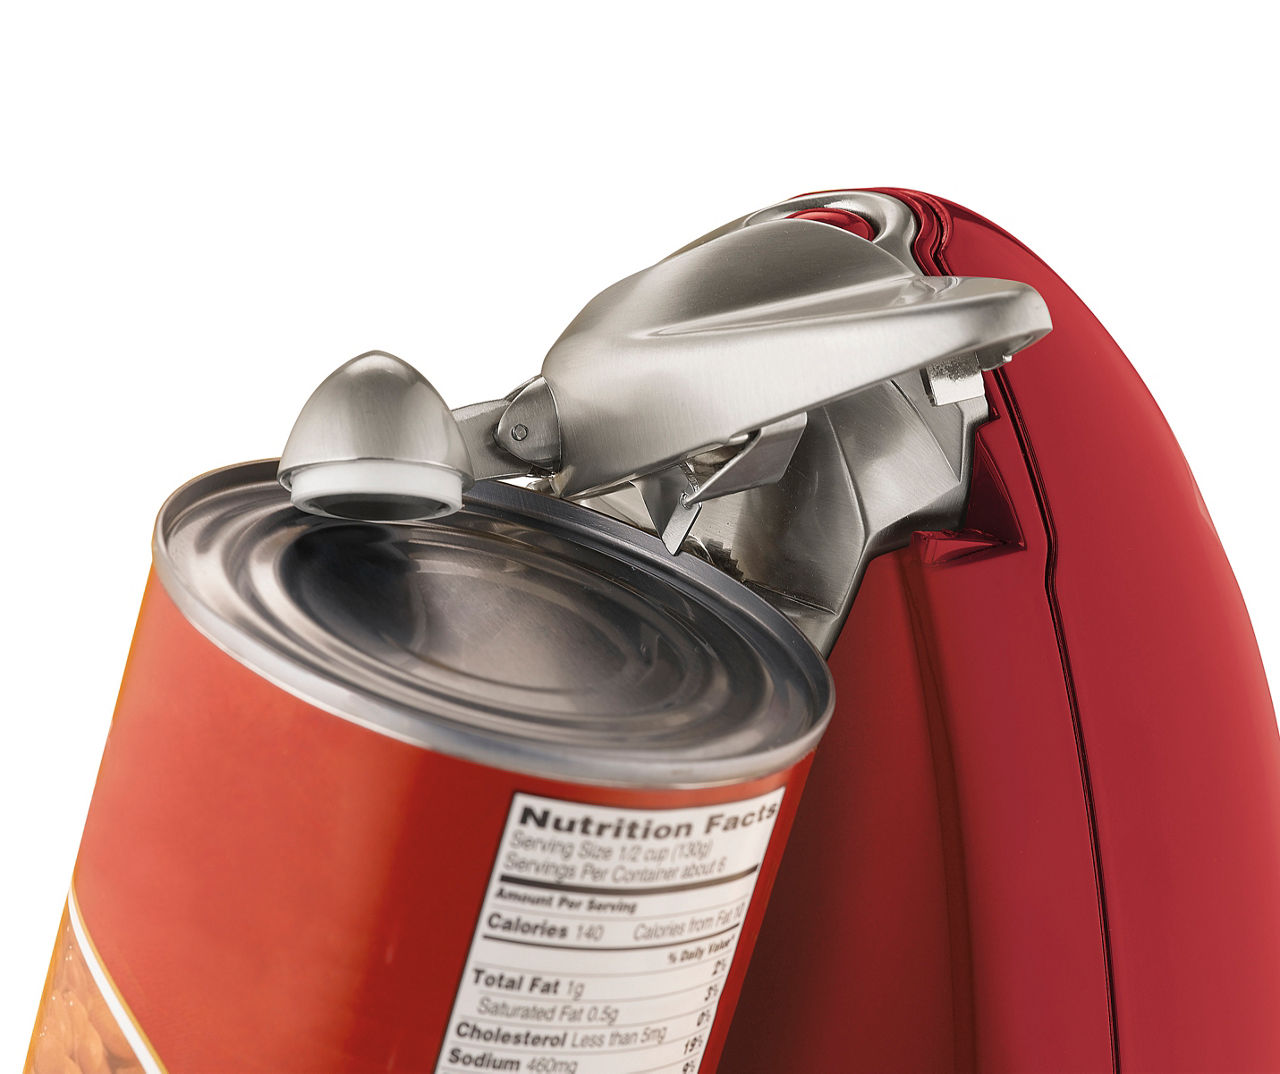 Hamilton Beach 76388R Ensemble Electric Can Opener Tall Red for sale online